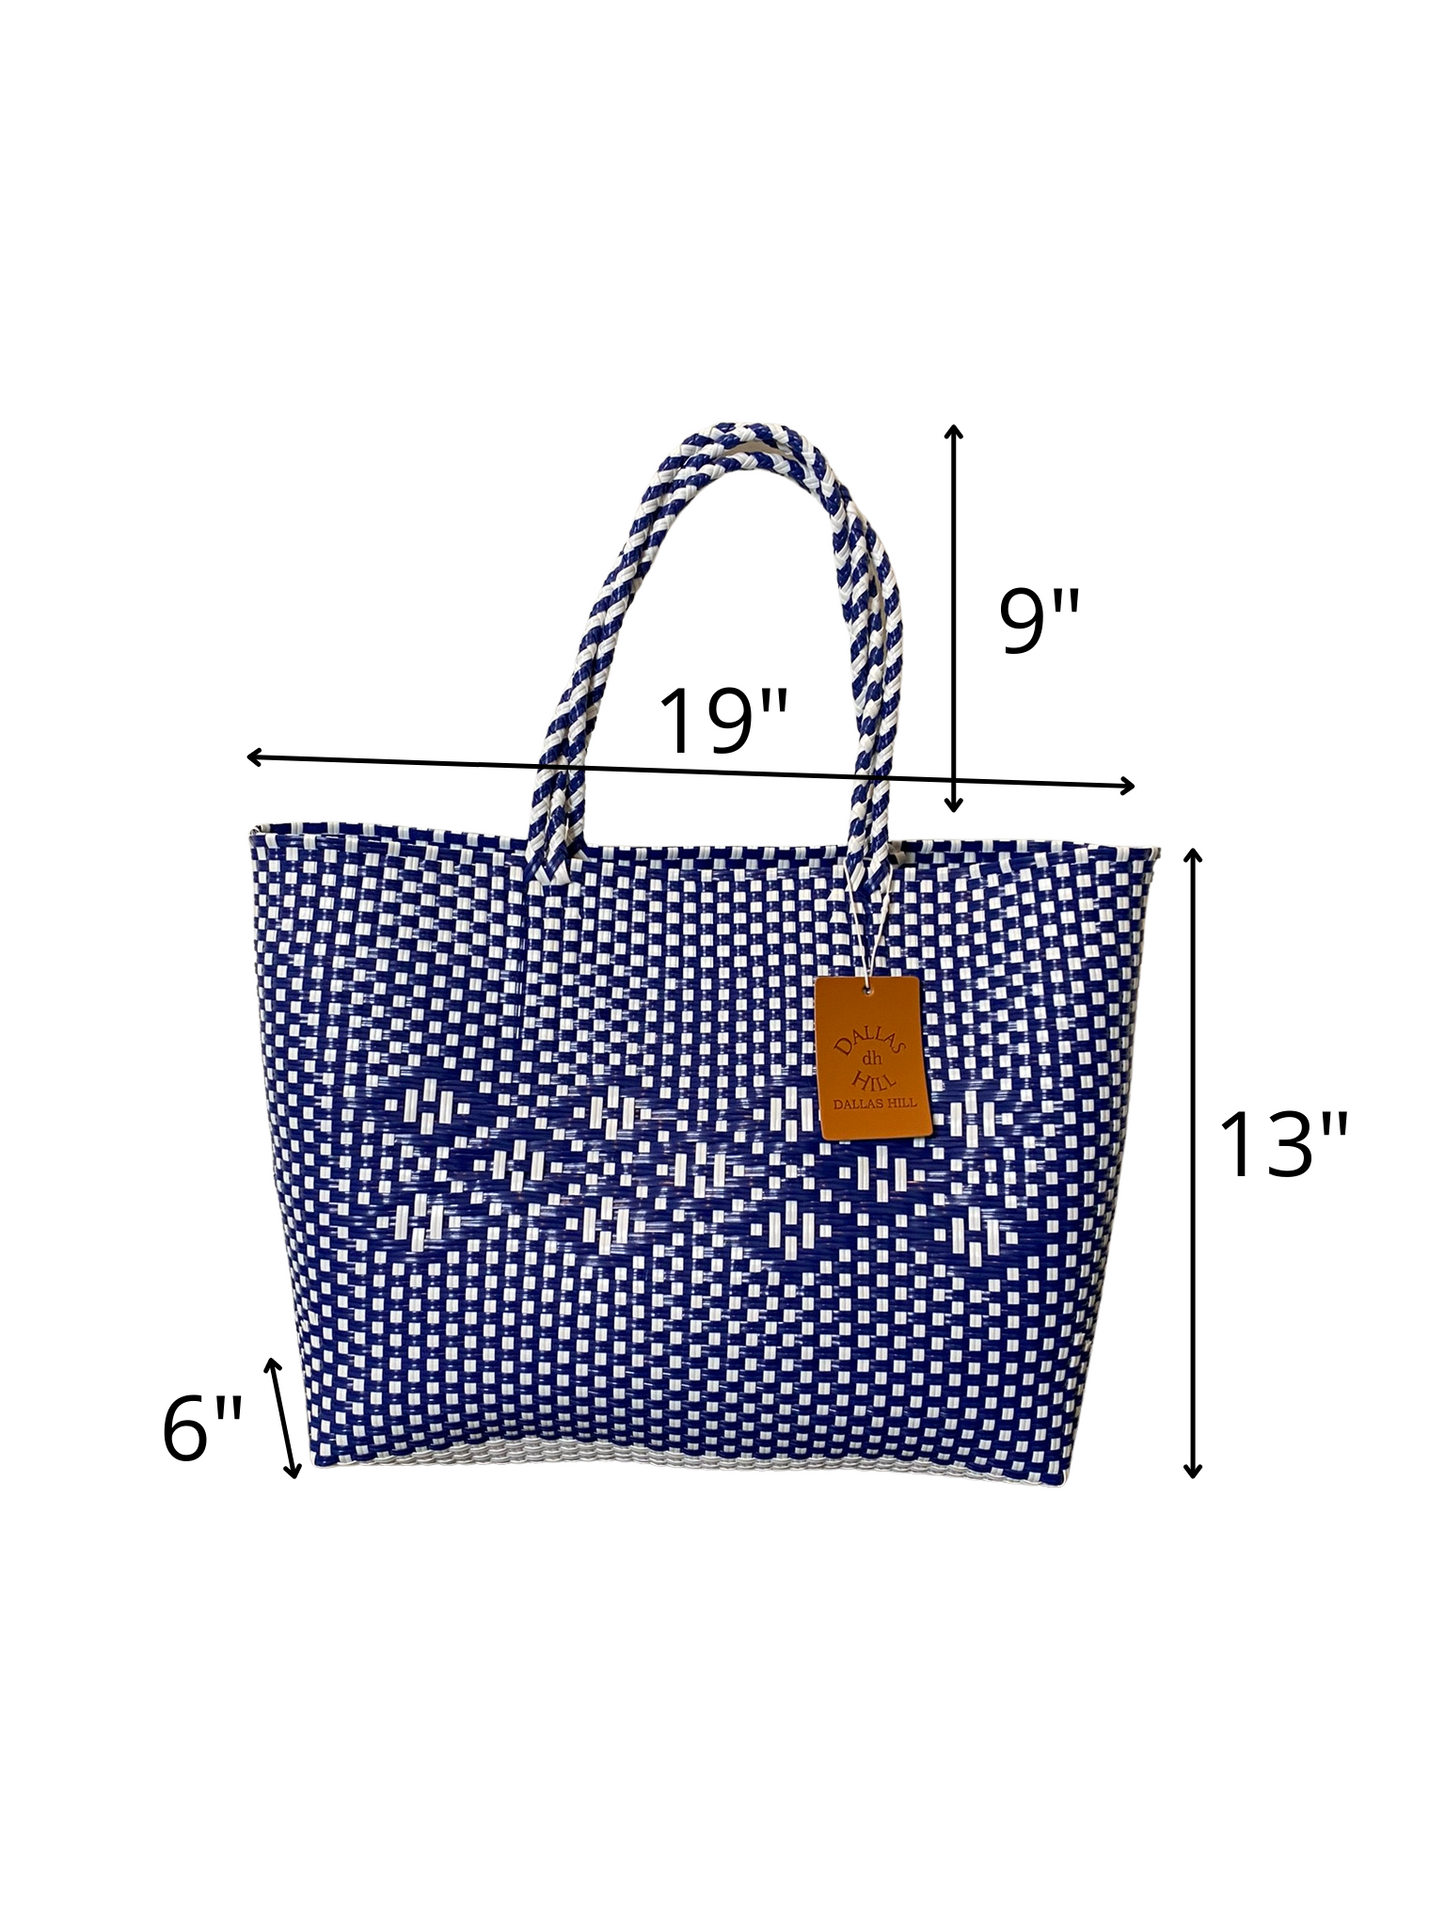 Woven Super Tote, Handwoven Recycled Plastic Tote, Woven Bag, Beach Bag, Summer Bag Navy & White